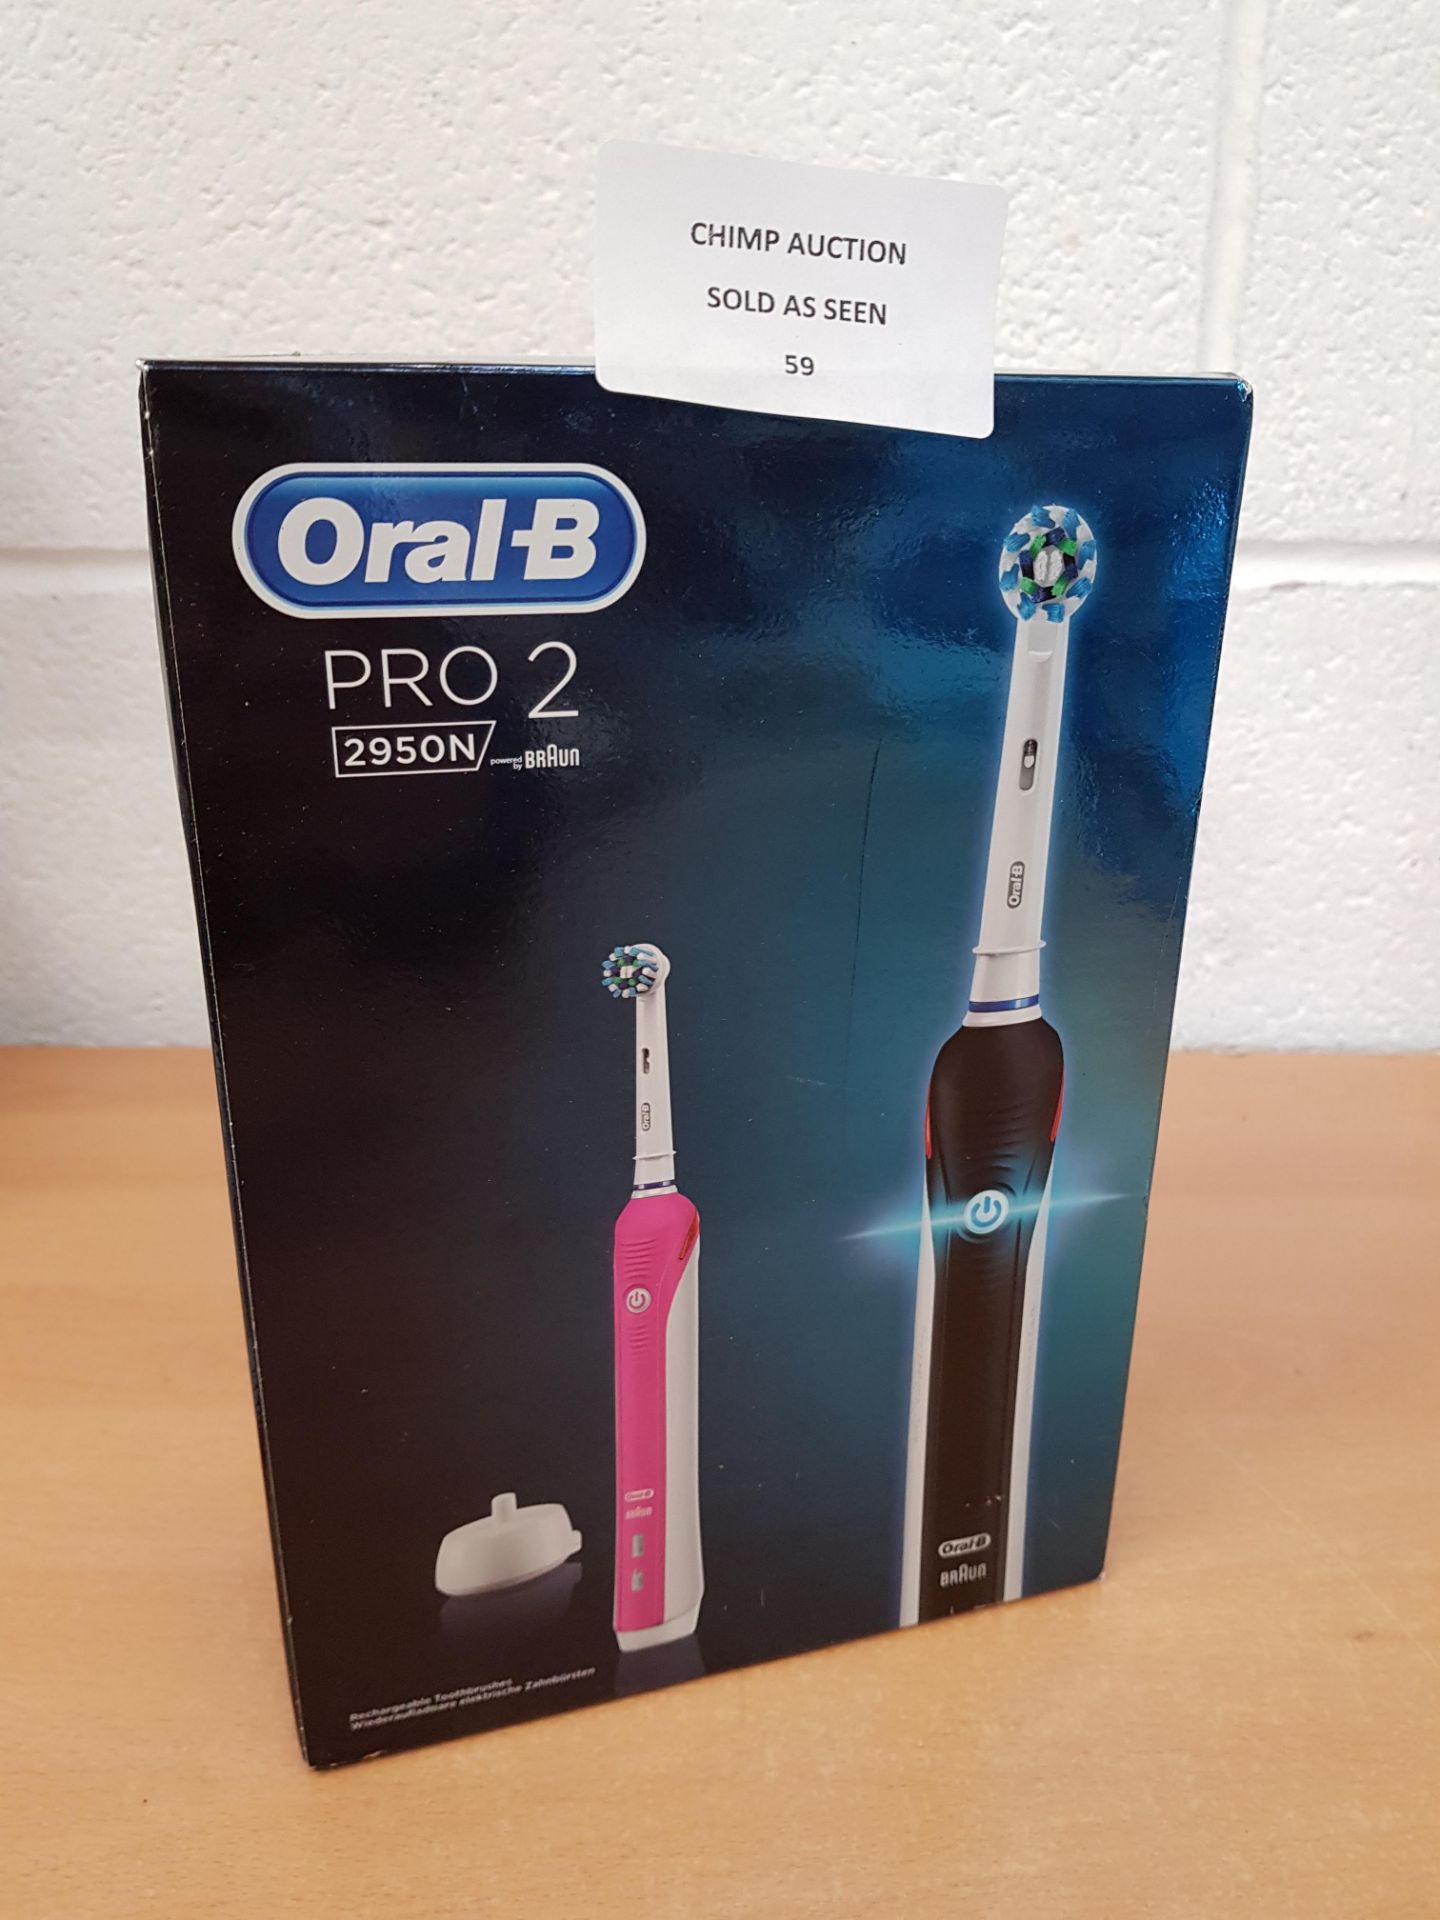 Oral-B Pro 2 2950 Twin edition electric toothbrush RRP £129.99